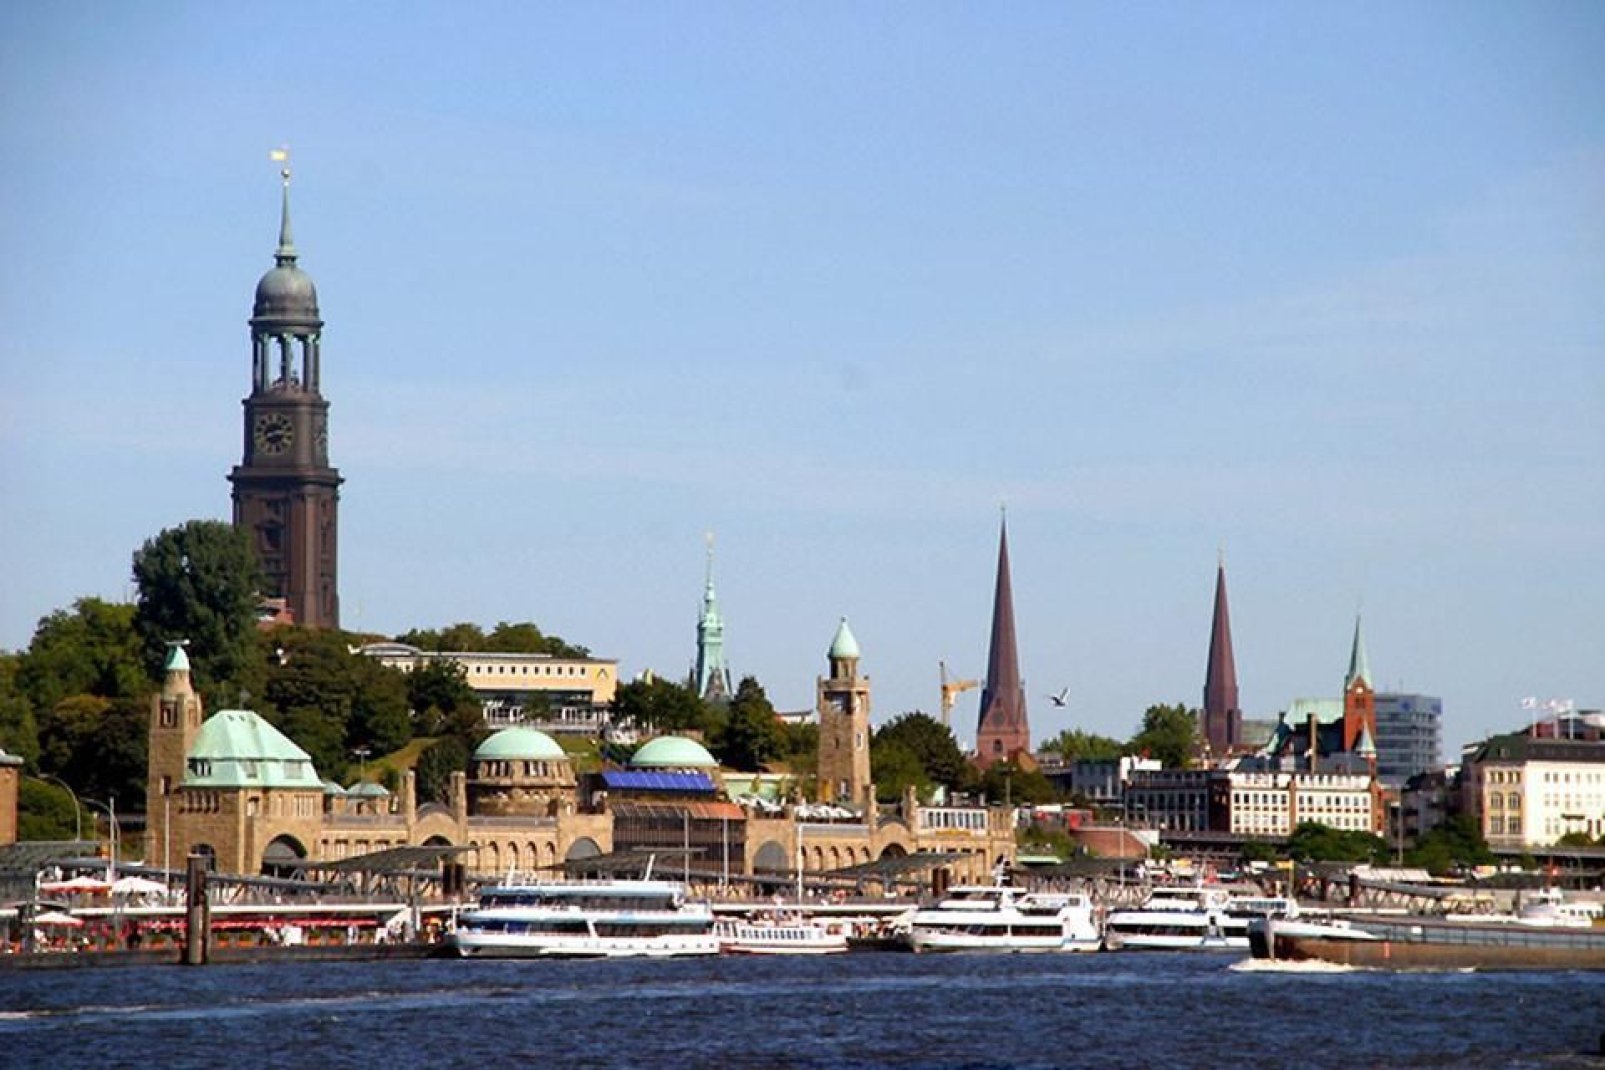 The city centre and city hall behind the harbor, the pass linking the two basins of the river Alster.